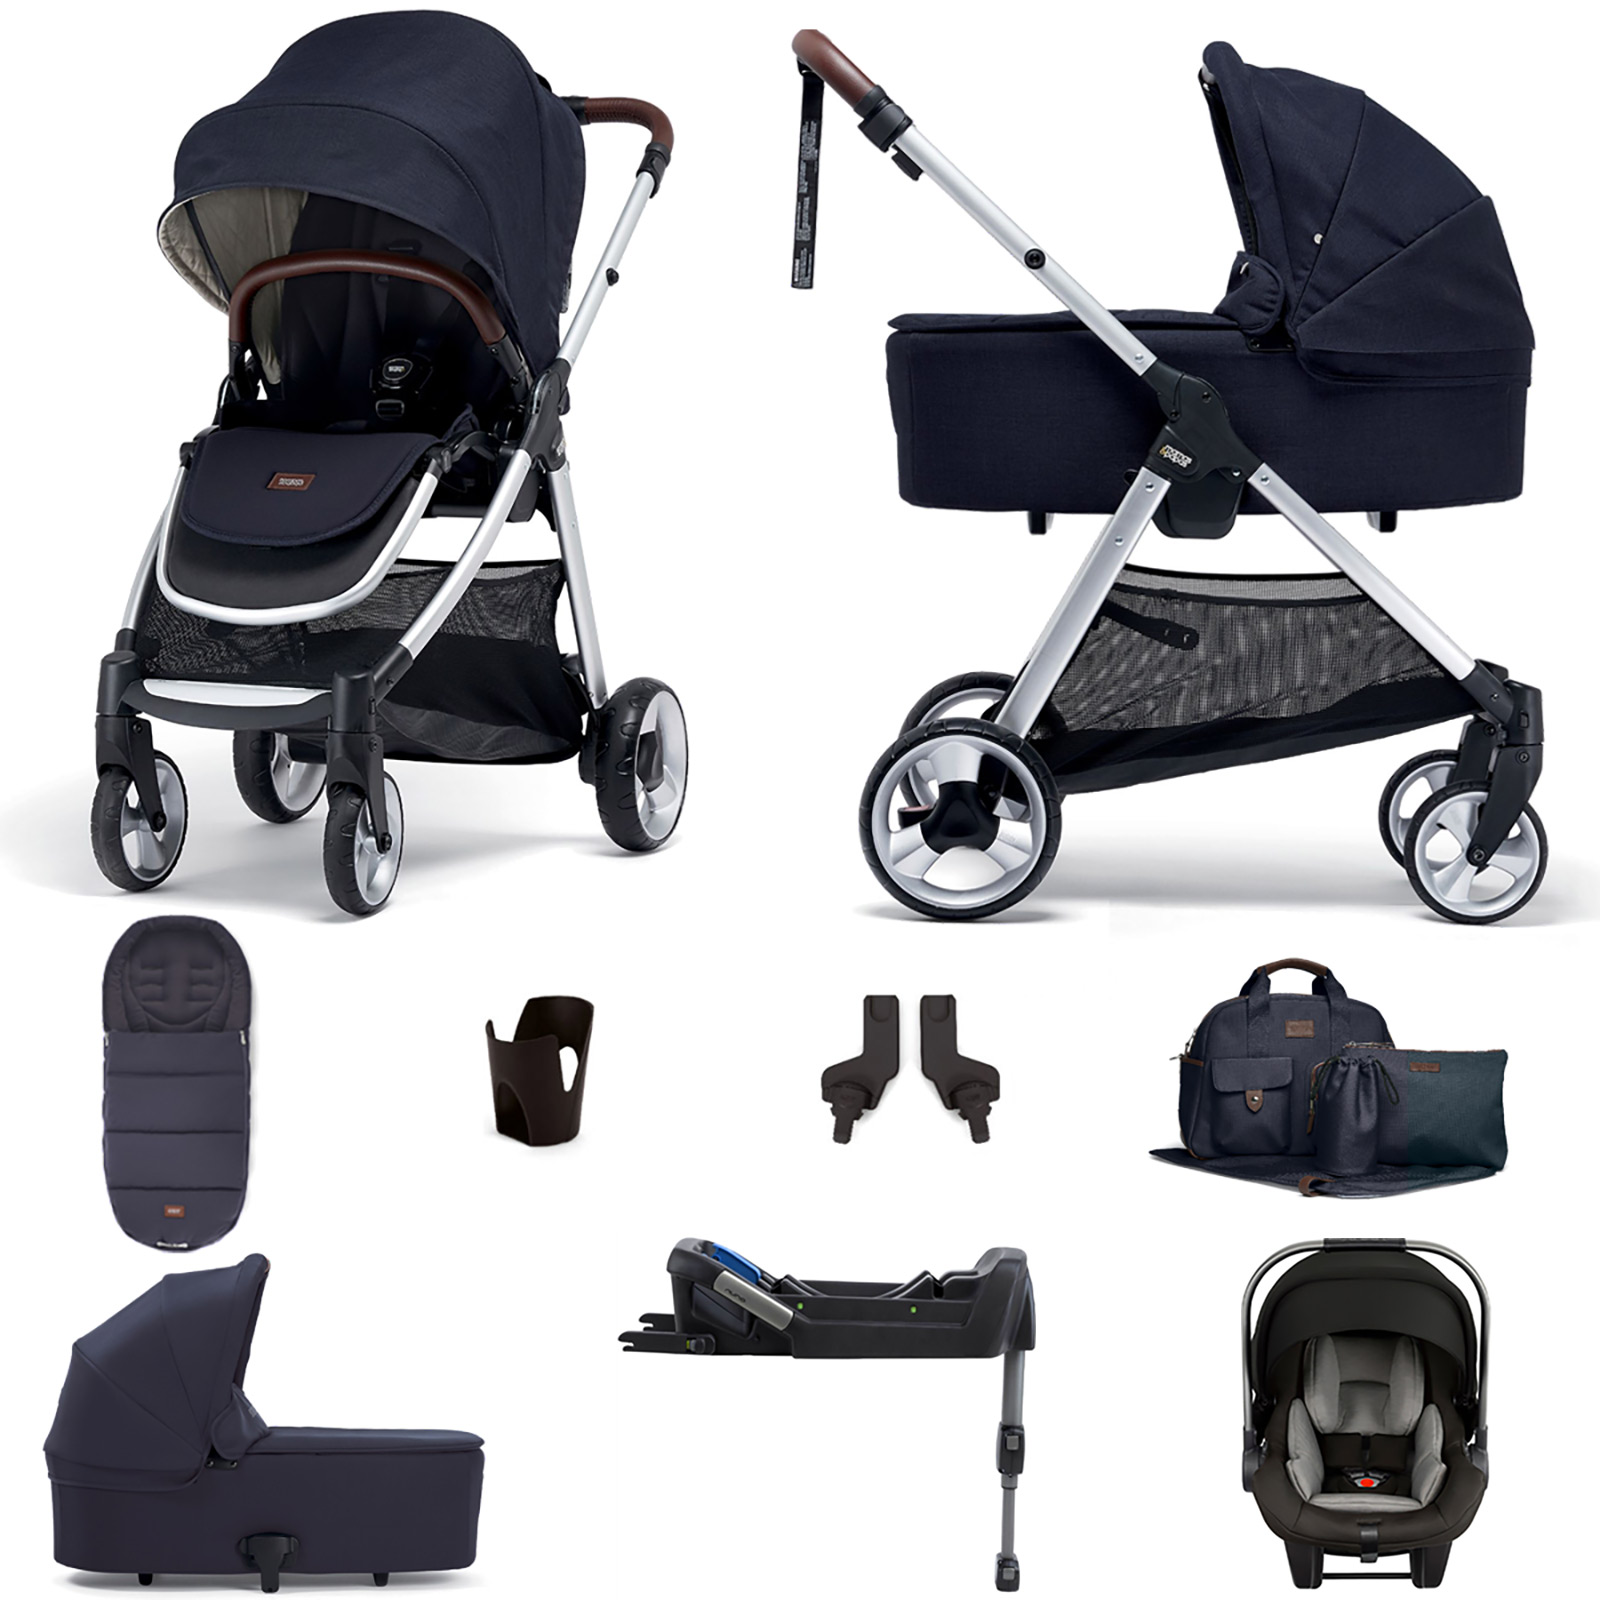 Mamas & Papas Flip XT2 Essentials (Pipa Lite Car Seat & ISOFIX Base) Travel System with Carrycot - Navy